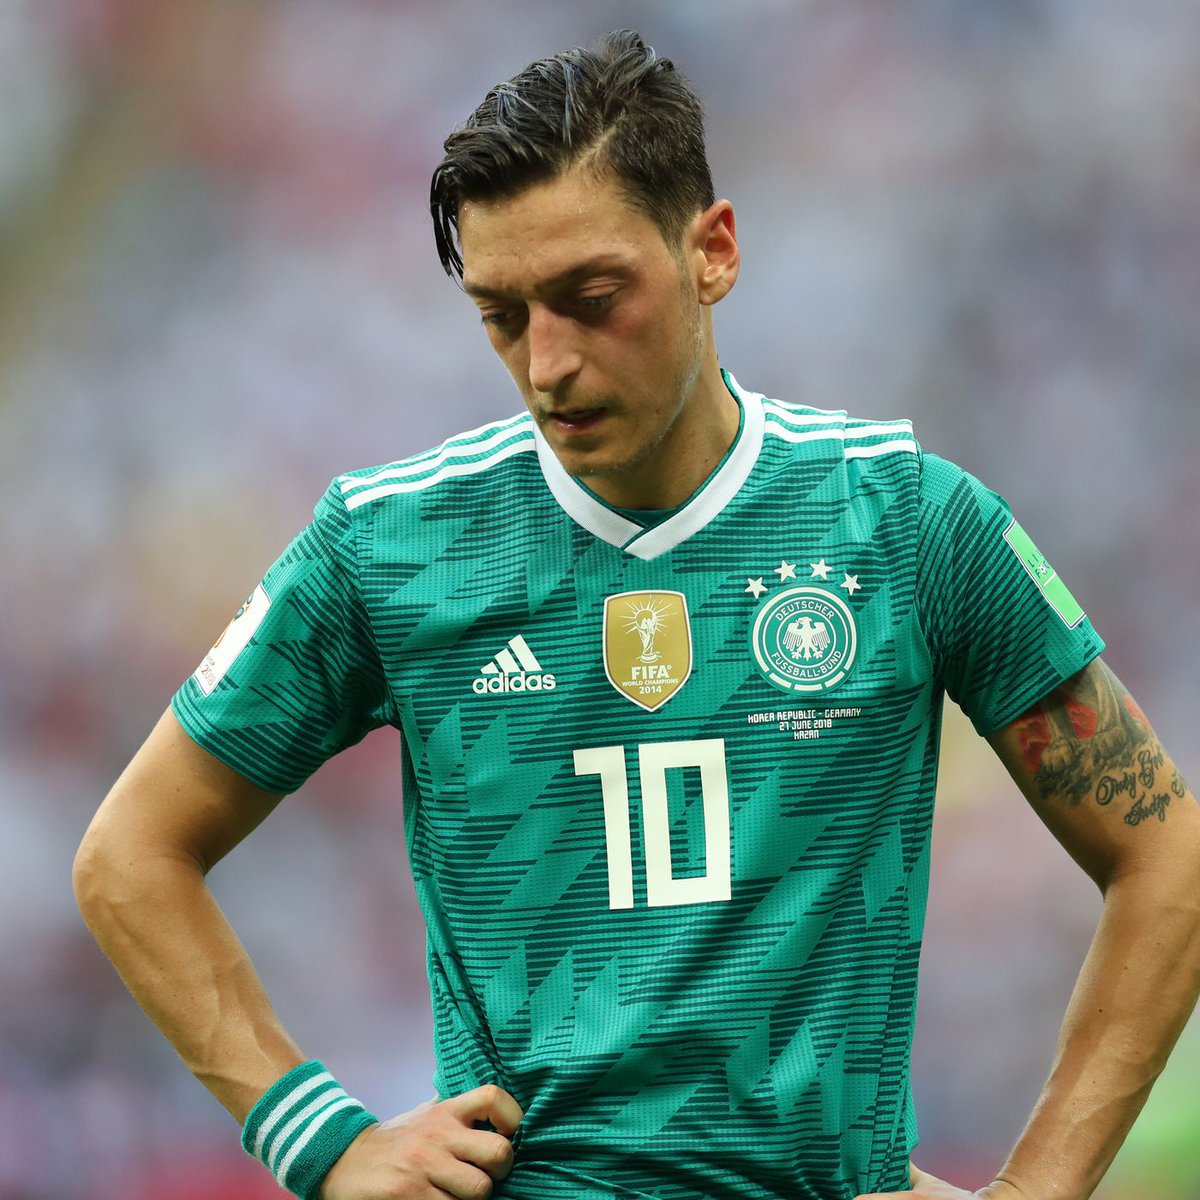 Özil created 5.5 chances per 90 minutes, more than any other player at the World Cup. He also created 7 chances against South Korea, no player created more in a game."I am German when we win, but I am an immigrant when we lose."